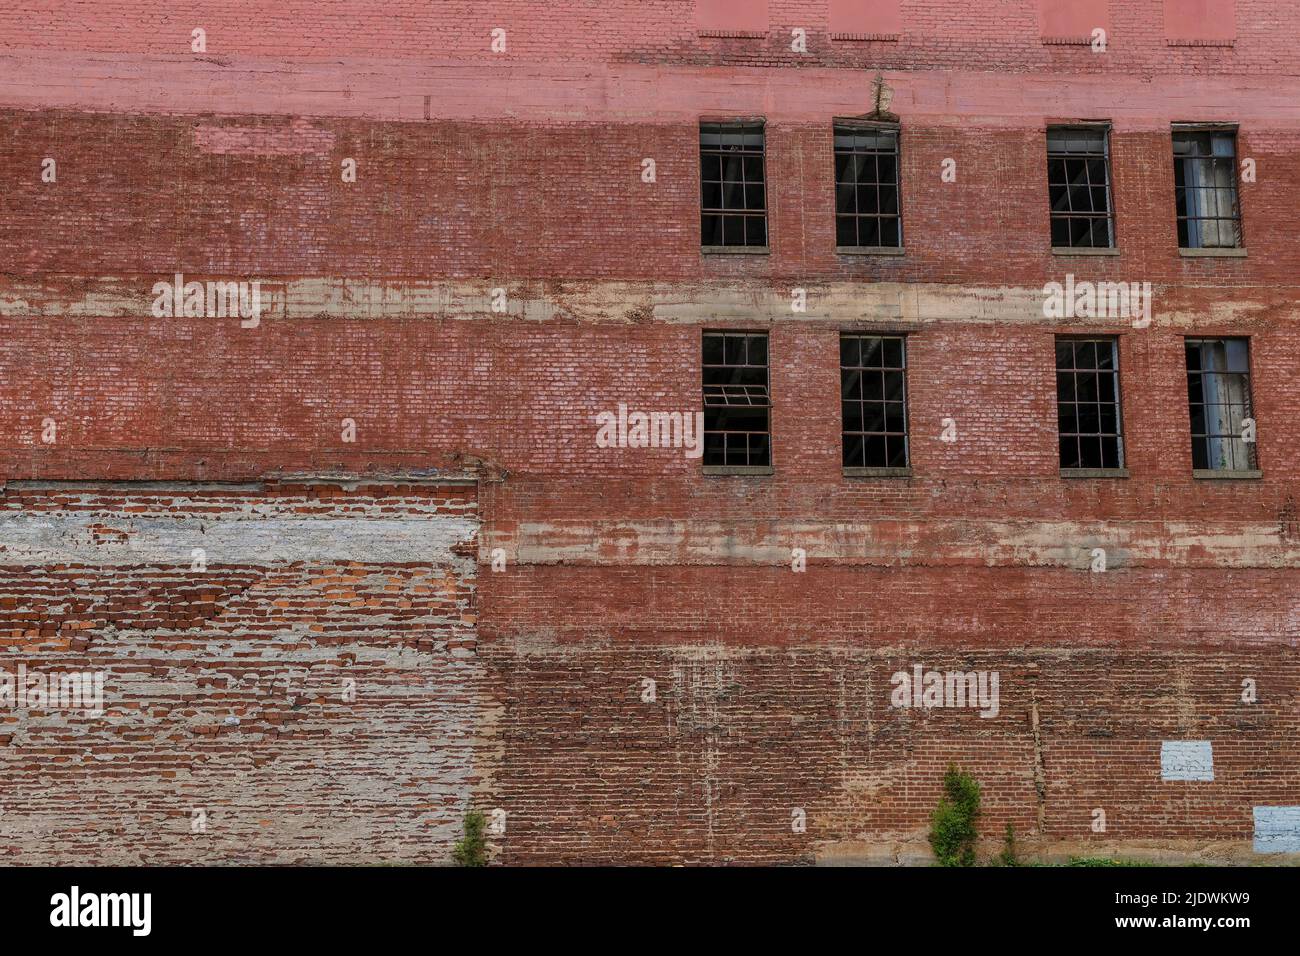 An old warehouse exterior wall of crumbling brick and windows without glass. Stock Photo